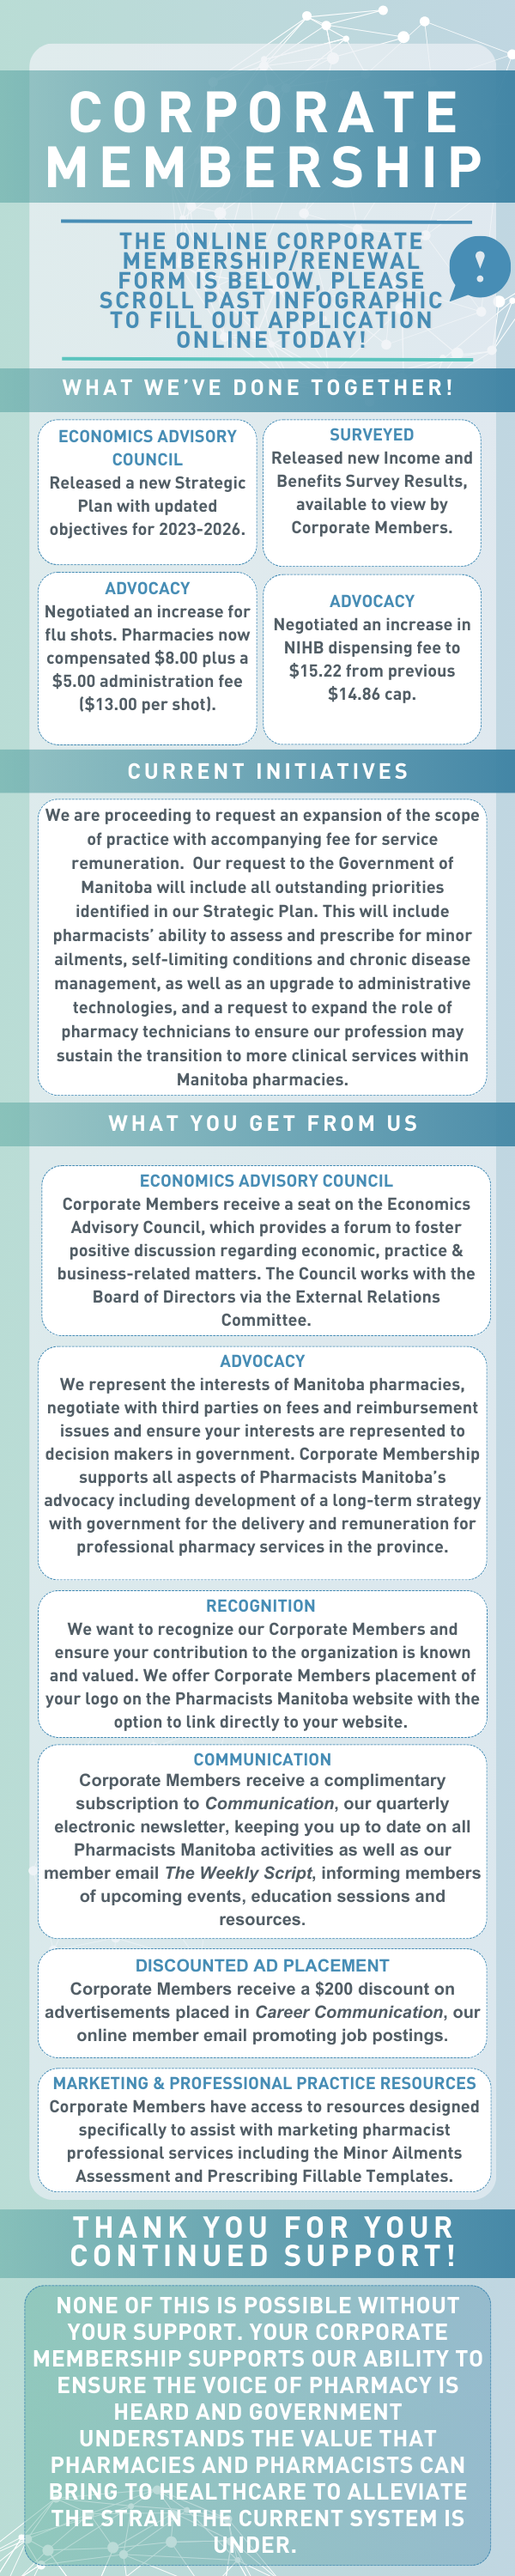 CORPORATE MEMBERSHIP THE ONLINE CORPORATE MEMBERSHIP/RENEWAL FORM IS BELOW, PLEASE SCROLL PAST INFOGRAPHIC TO FILL OUT APPLICATION ONLINE TODAY! WHAT WE'VE DONE TOGETHER! ECONOMICS ADVISORY COUNCIL Released a new Strategic Plan with updated objectives for 2023-2026. SURVEYED Released new Income and Benefits Survey Results, available to view by Corporate Members. ADVOCACY Negotiated an increase for flu shots. Pharmacies now compensated $8.00 plus a $5.00 administration fee ($13.00 per shot). ADVOCACY Negotiated an increase in NIHB dispensing fee to $15.22 from previous $14.86 cap. CURRENT INITIATIVES We are proceeding to request an expansion of the scope of practice with accompanying fee for service remuneration. Our request to the Government of Manitoba will include all outstanding priorities identified in our Strategic Plan. This will include pharmacists' ability to assess and prescribe for minor ailments, self-limiting conditions and chronic disease management, as well as an upgrade to administrative technologies, and a request to expand the role of pharmacy technicians to ensure our profession may sustain the transition to more clinical services within Manitoba pharmacies. WHAT YOU GET FROM US ECONOMICS ADVISORY COUNCIL Corporate Members receive a seat on the Economics Advisory Council, which provides a forum to foster positive discussion regarding economic, practice & business-related matters. The Council works with the Board of Directors via the External Relations Committee. ADVOCACY We represent the interests of Manitoba pharmacies, negotiate with third parties on fees and reimbursement issues and ensure your interests are represented to decision makers in government. Corporate Membership supports all aspects of Pharmacists Manitoba's advocacy including development of a long-term strategy with government for the delivery and remuneration for professional pharmacy services in the province. RECOGNITION We want to recognize our Corporate Members and ensure your contribution to the organization is known and valued. We offer Corporate Members placement of your logo on the Pharmacists Manitoba website with the option to link directly to your website. COMMUNICATION Corporate Members receive a complimentary subscription to Communication, our quarterly electronic newsletter, keeping you up to date on all Pharmacists Manitoba activities as well as our member email The Weekly Script, informing members of upcoming events, education sessions and resources. DISCOUNTED AD PLACEMENT Corporate Members receive a $200 discount on advertisements placed in Career Communication, our online member email promoting job postings. MARKETING & PROFESSIONAL PRACTICE RESOURCES Corporate Members have access to resources designed specifically to assist with marketing pharmacist professional services including the Minor Ailments Assessment and Prescribing Fillable Templates. THANK YOU FOR YOUR CONTINUED SUPPORT! NONE OF THIS IS POSSIBLE WITHOUT YOUR SUPPORT. YOUR CORPORATE MEMBERSHIP SUPPORTS OUR ABILITY TO ENSURE THE VOICE OF PHARMACY IS HEARD AND GOVERNMENT UNDERSTANDS THE VALUE THAT PHARMACIES AND PHARMACISTS CAN BRING TO HEALTHCARE TO ALLEVIATE THE STRAIN THE CURRENT SYSTEM IS UNDER.